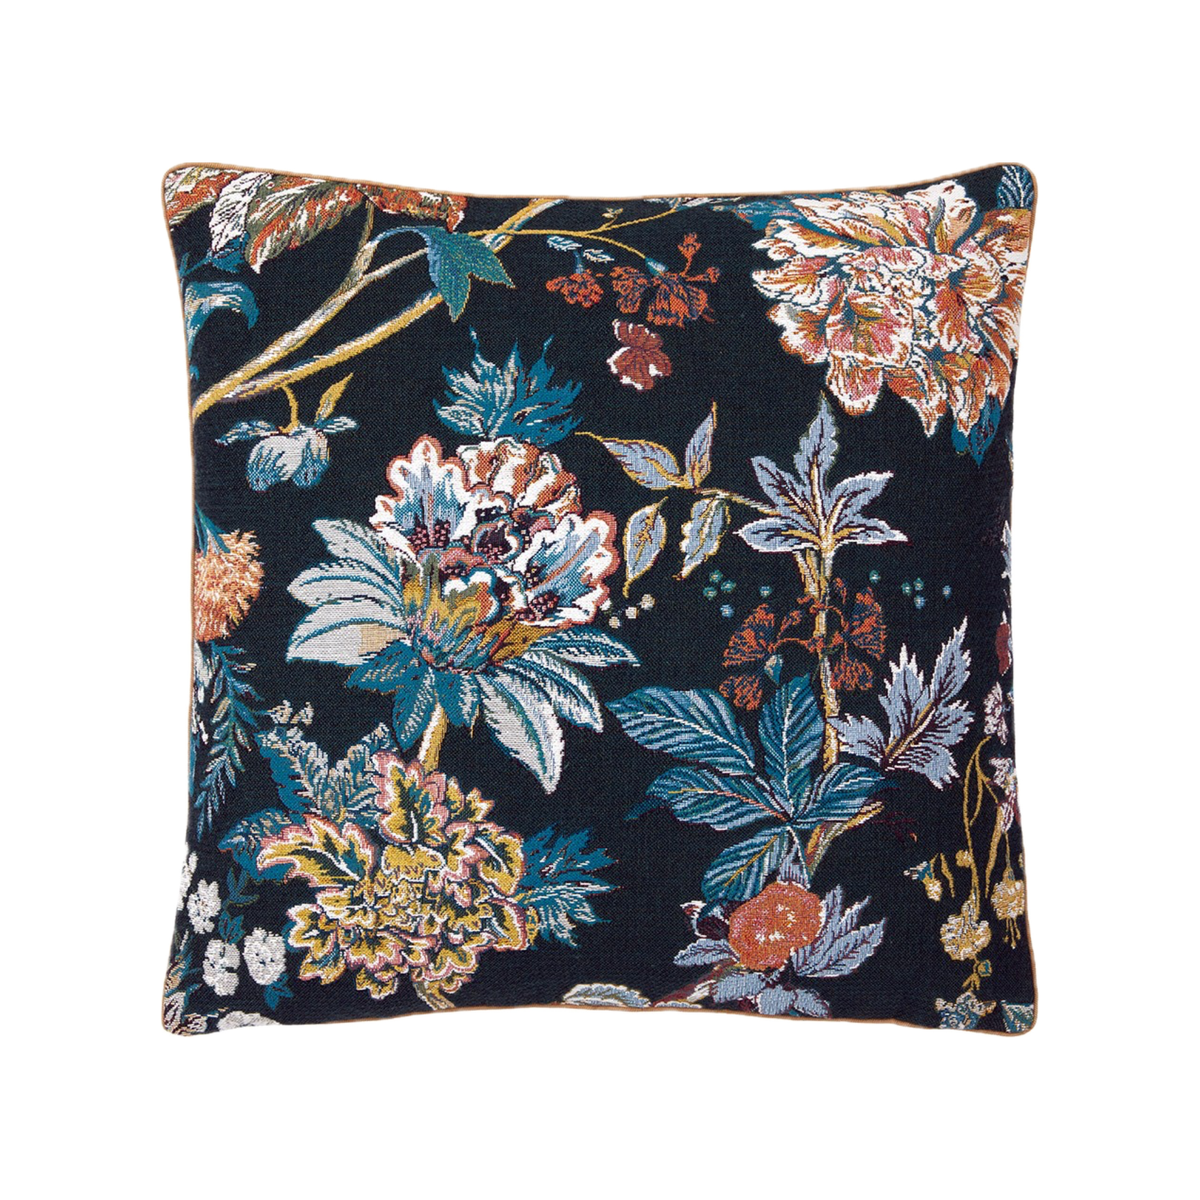 Decorative Pillow of Yves Delorme Golestan Bedding in Nuit Color